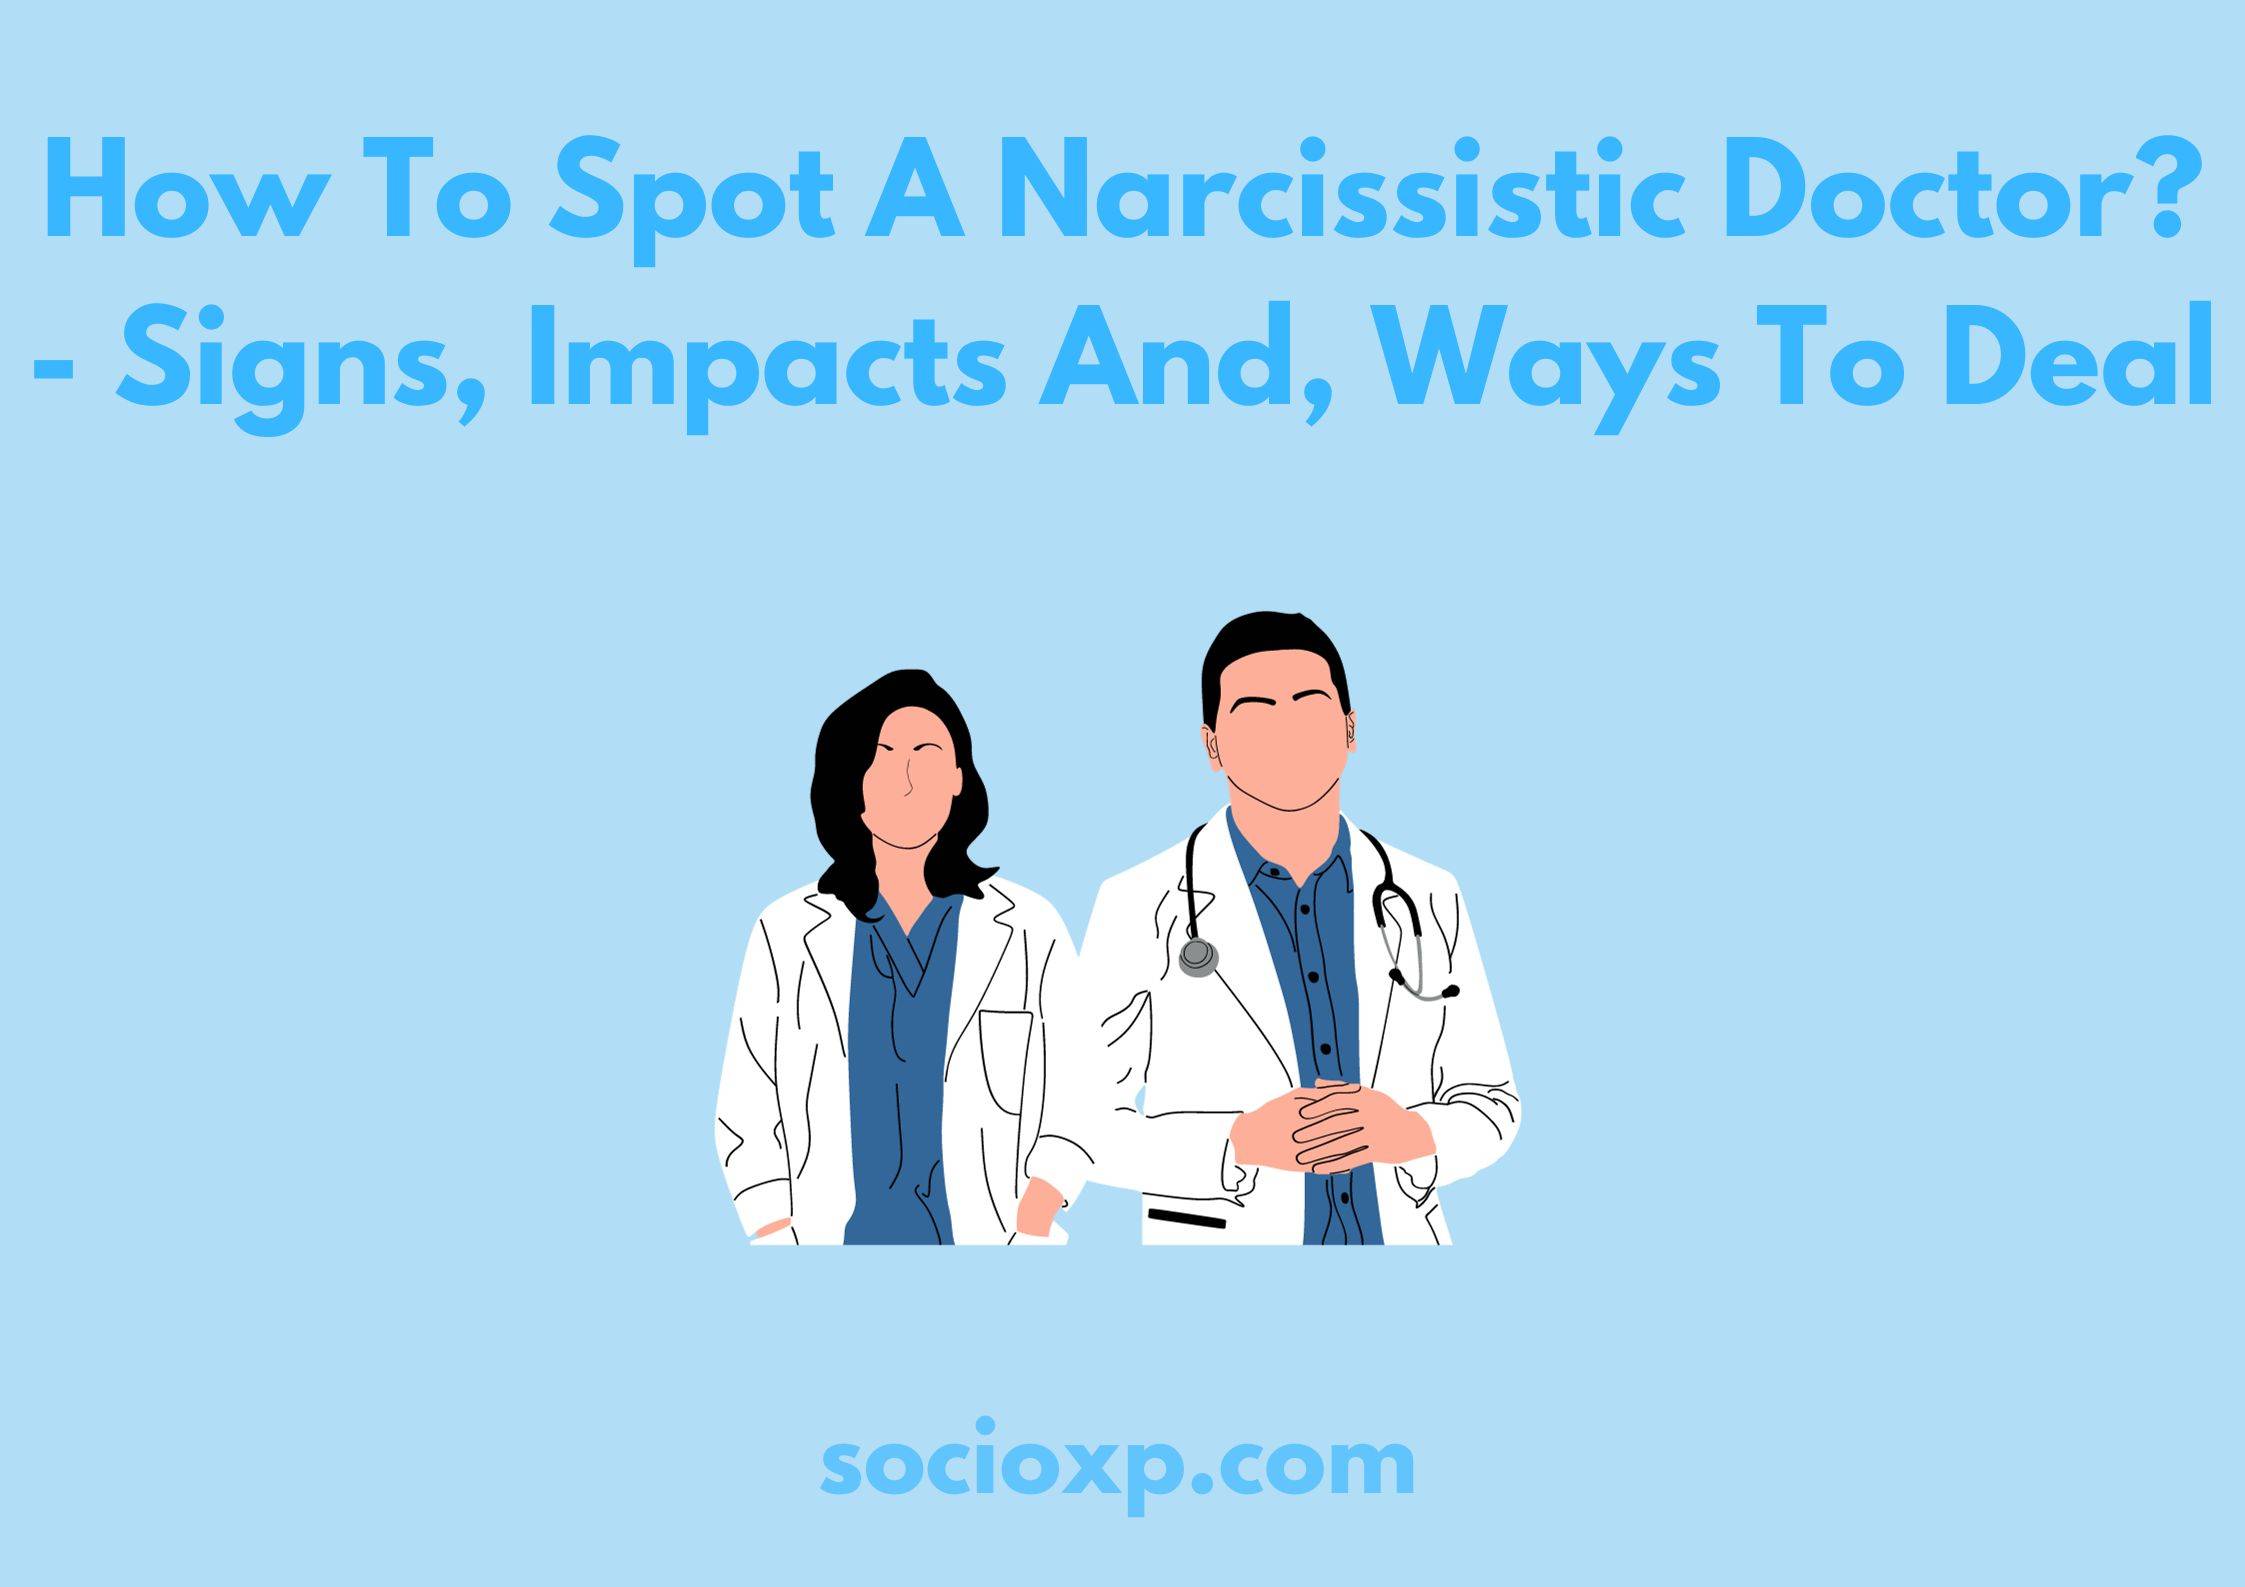 How To Spot A Narcissistic Doctor? - Signs, Impacts And, Ways To Deal